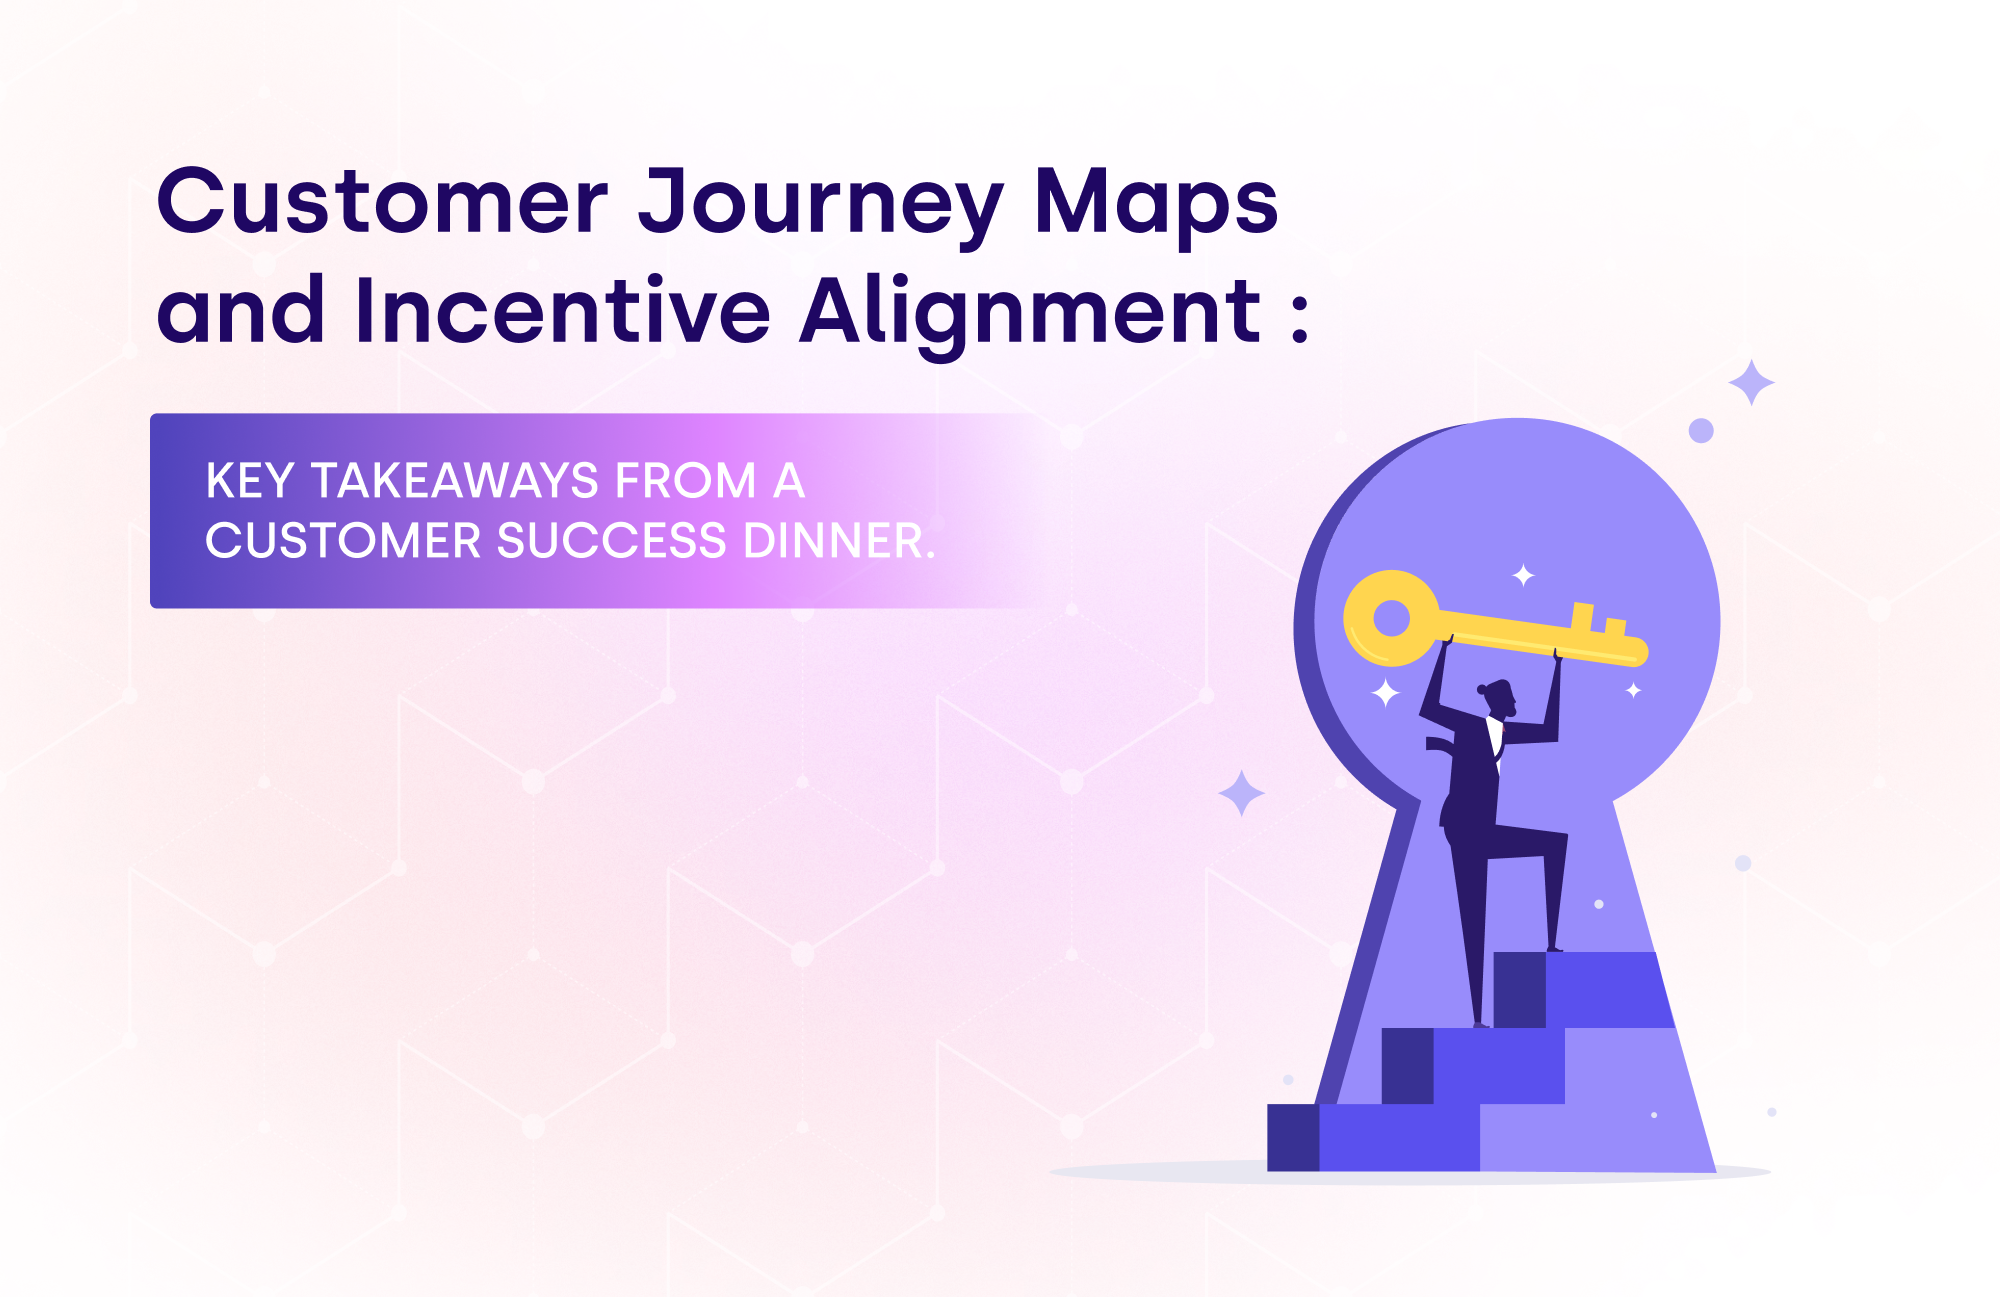 Customer Journey Maps and Incentive Alignment